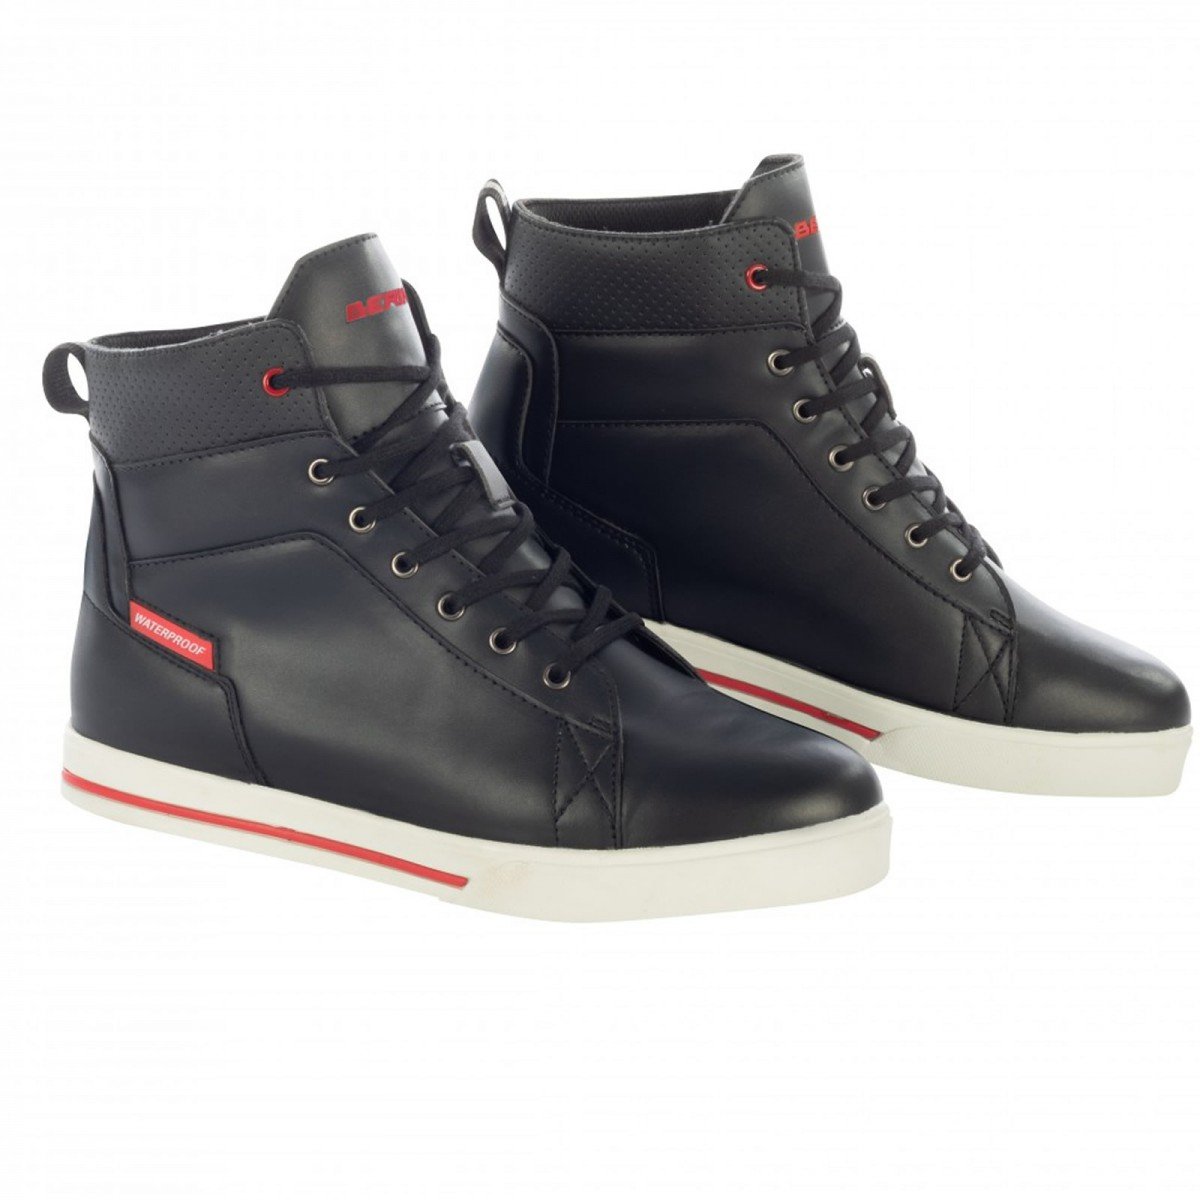 Image of Bering Sneakers Indy Black Red Talla 46